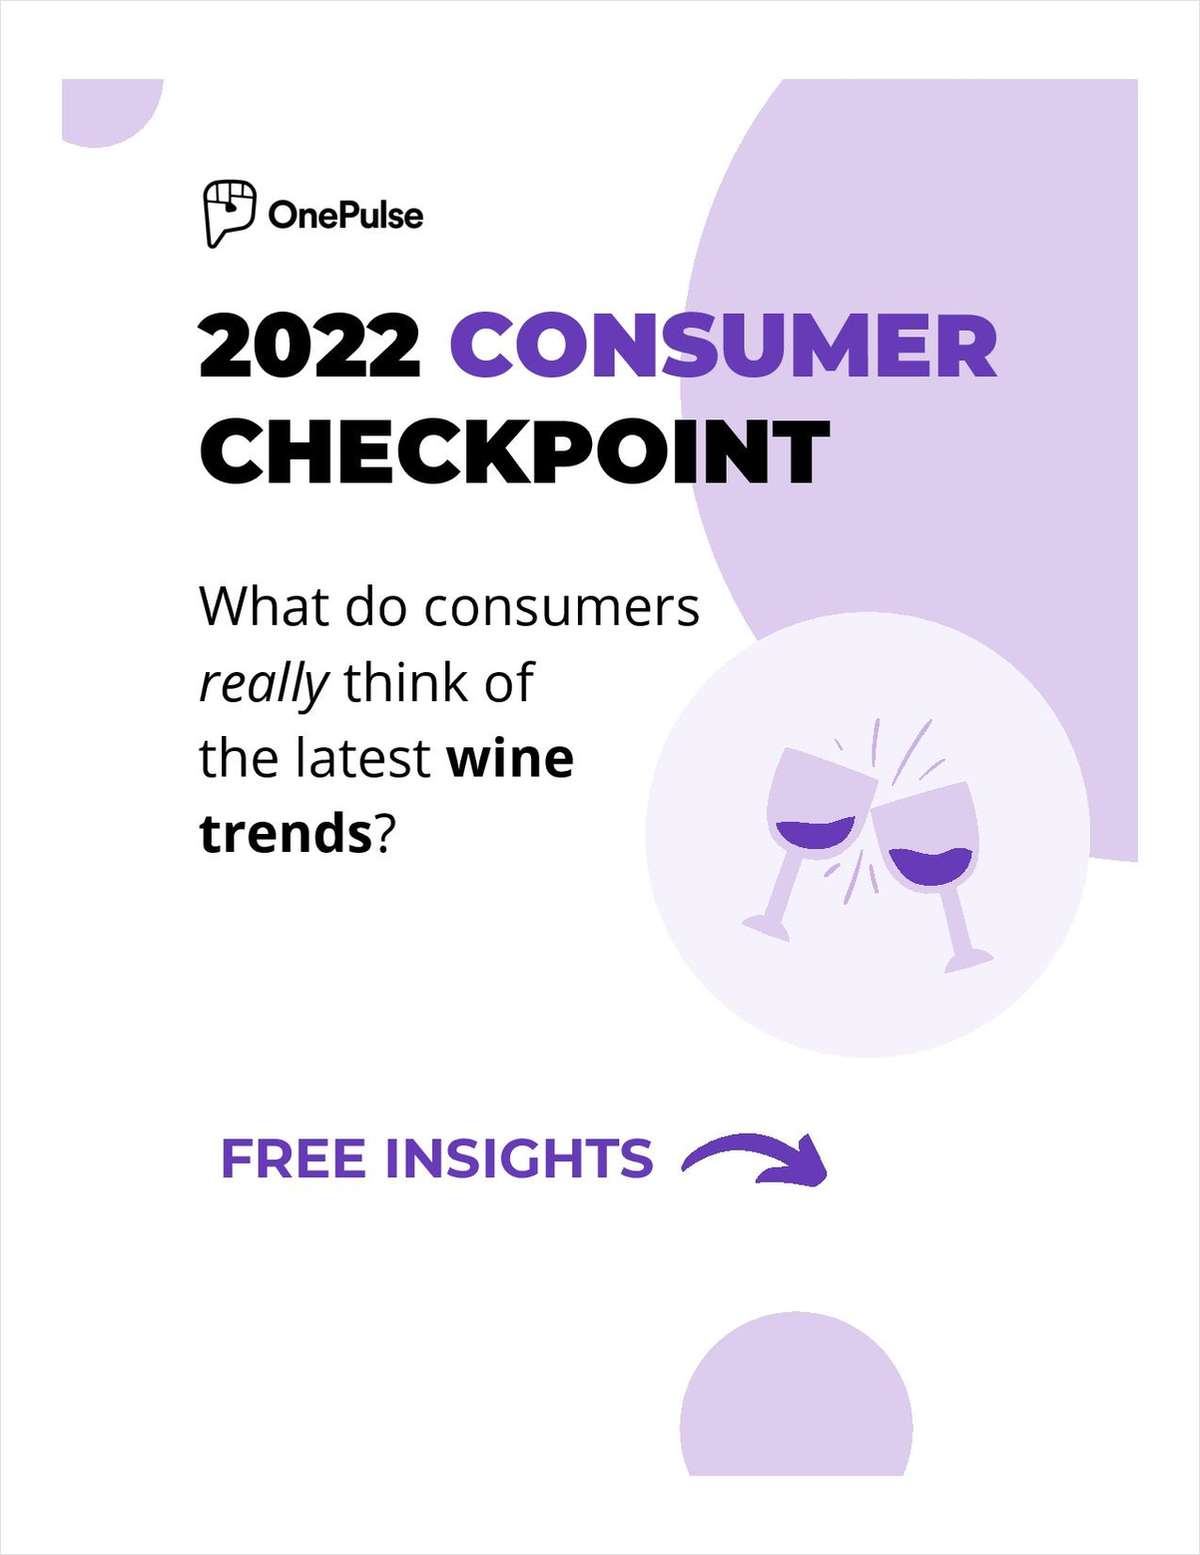 2022 Consumer Checkpoint: Behaviors + Trends of Wine Consumers